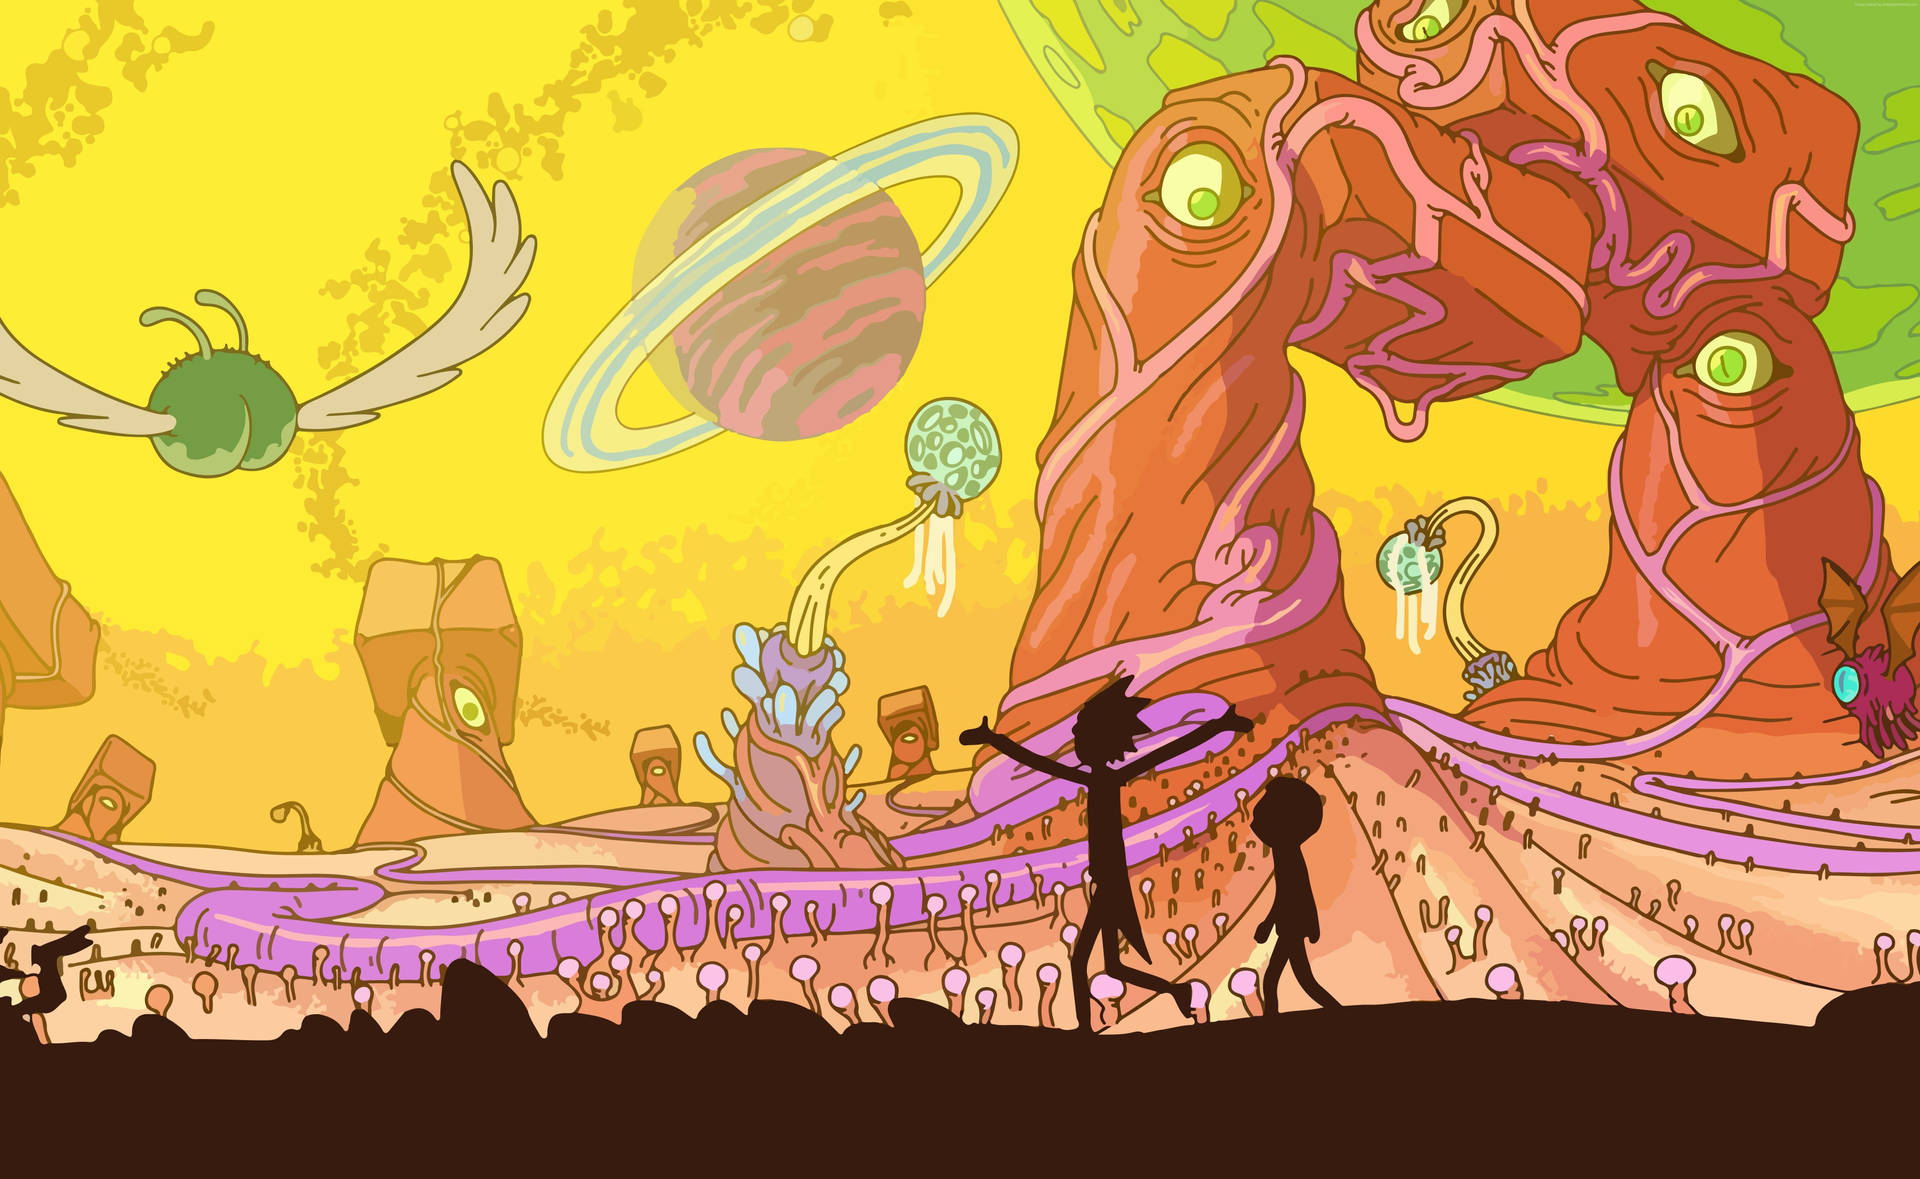 An alien store on a distant planet – Gozarpazorp in the Rick and Morty universe Wallpaper